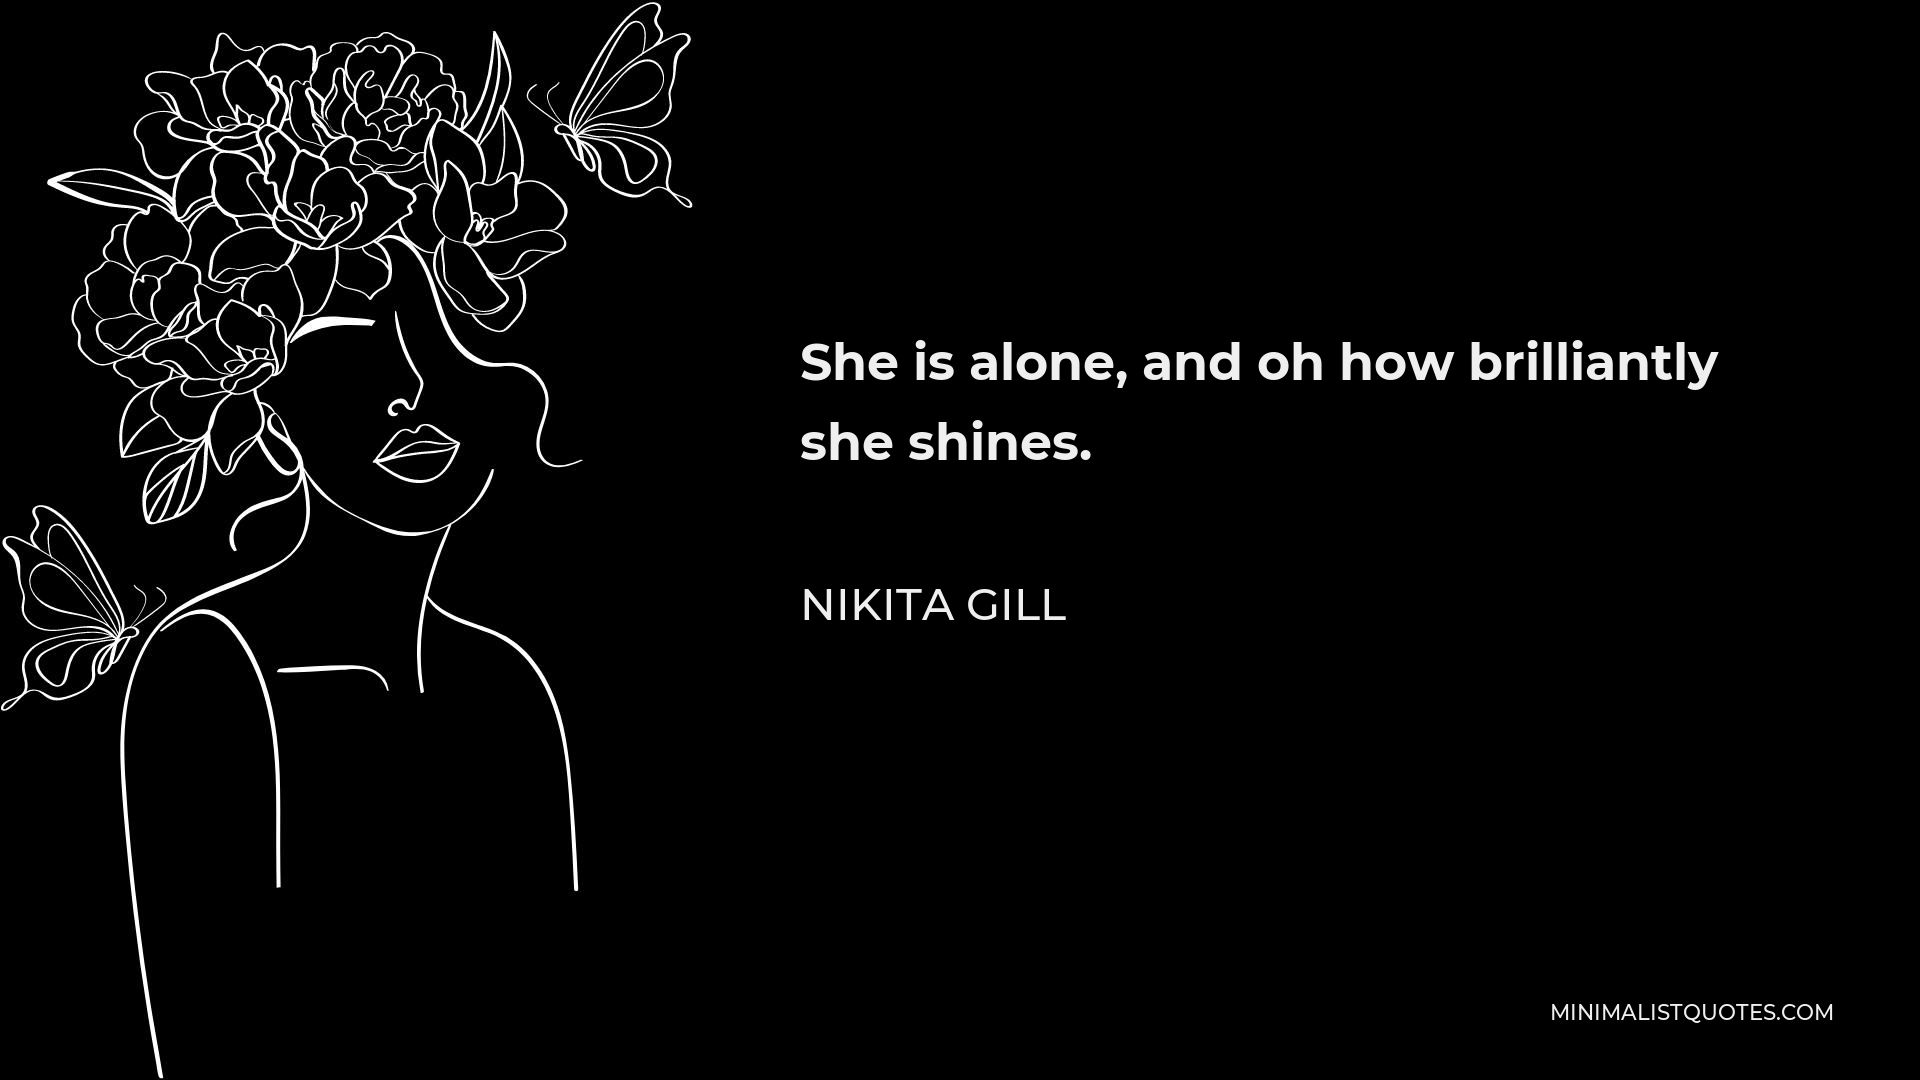 Nikita Gill Quote - She is alone, and oh how brilliantly she shines.